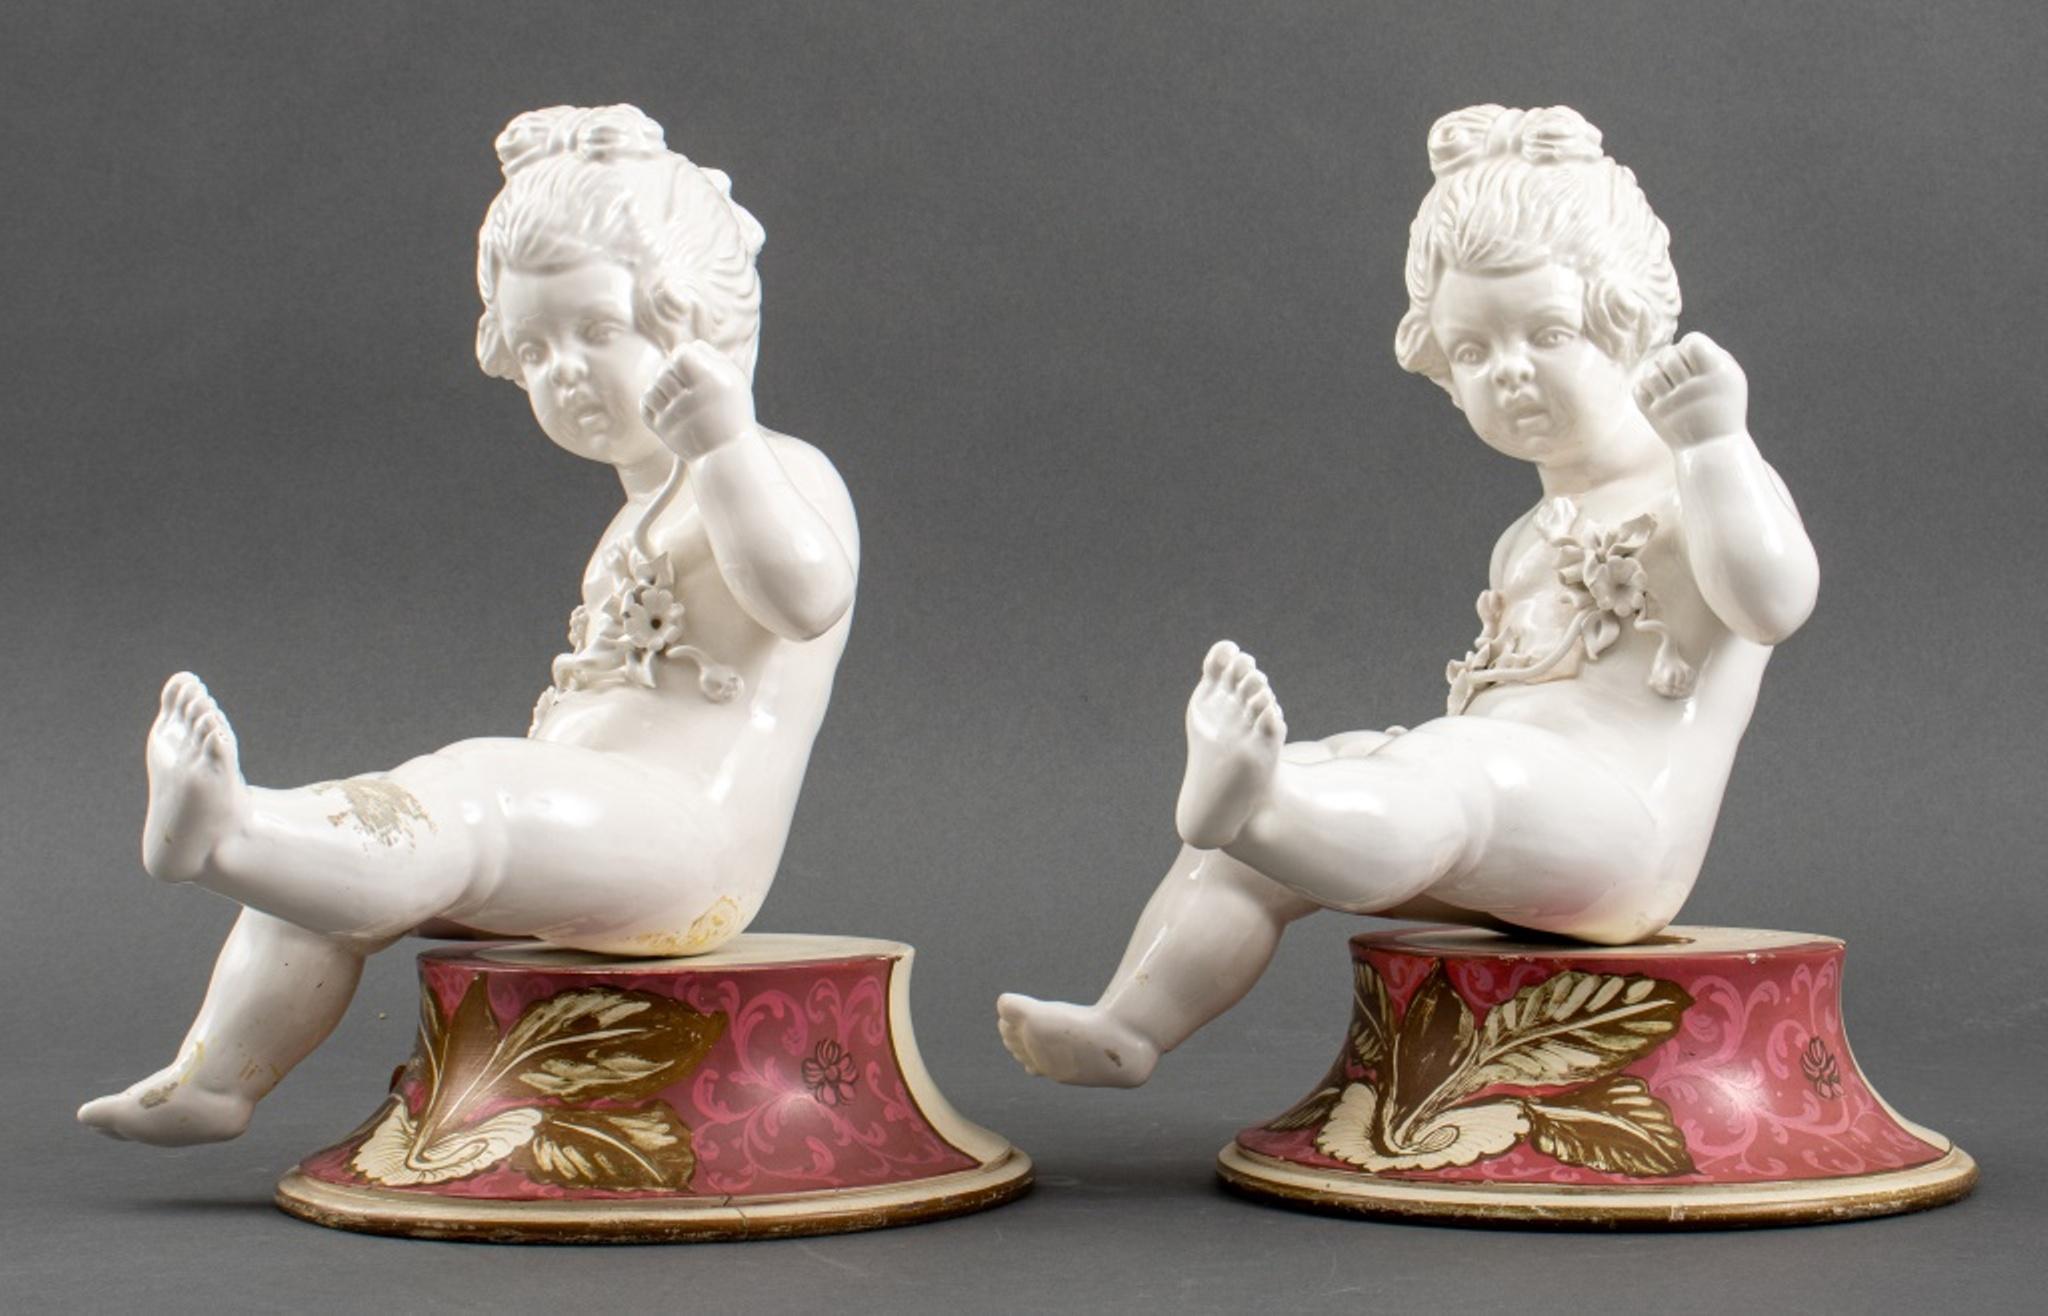 Pair of vintage white porcelain cherub putti sculptures holding molded branches with flowers, mounted on polychrome and gilt painted wood bases. In very good vintage condition.

Dealer: S138XX